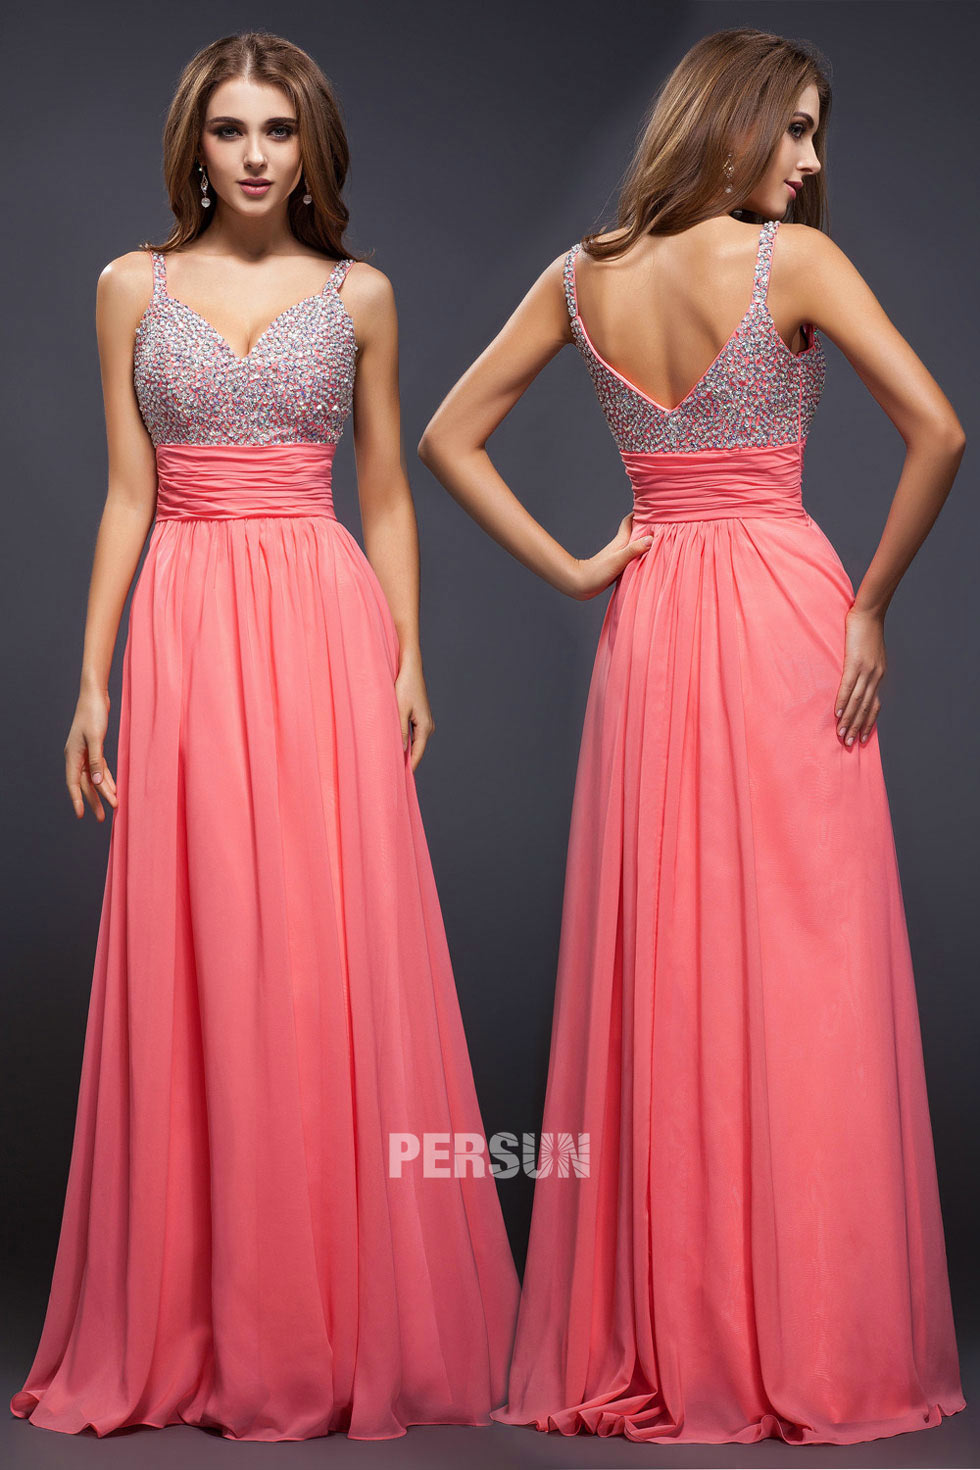 Coral pink evening dress with beading bodice